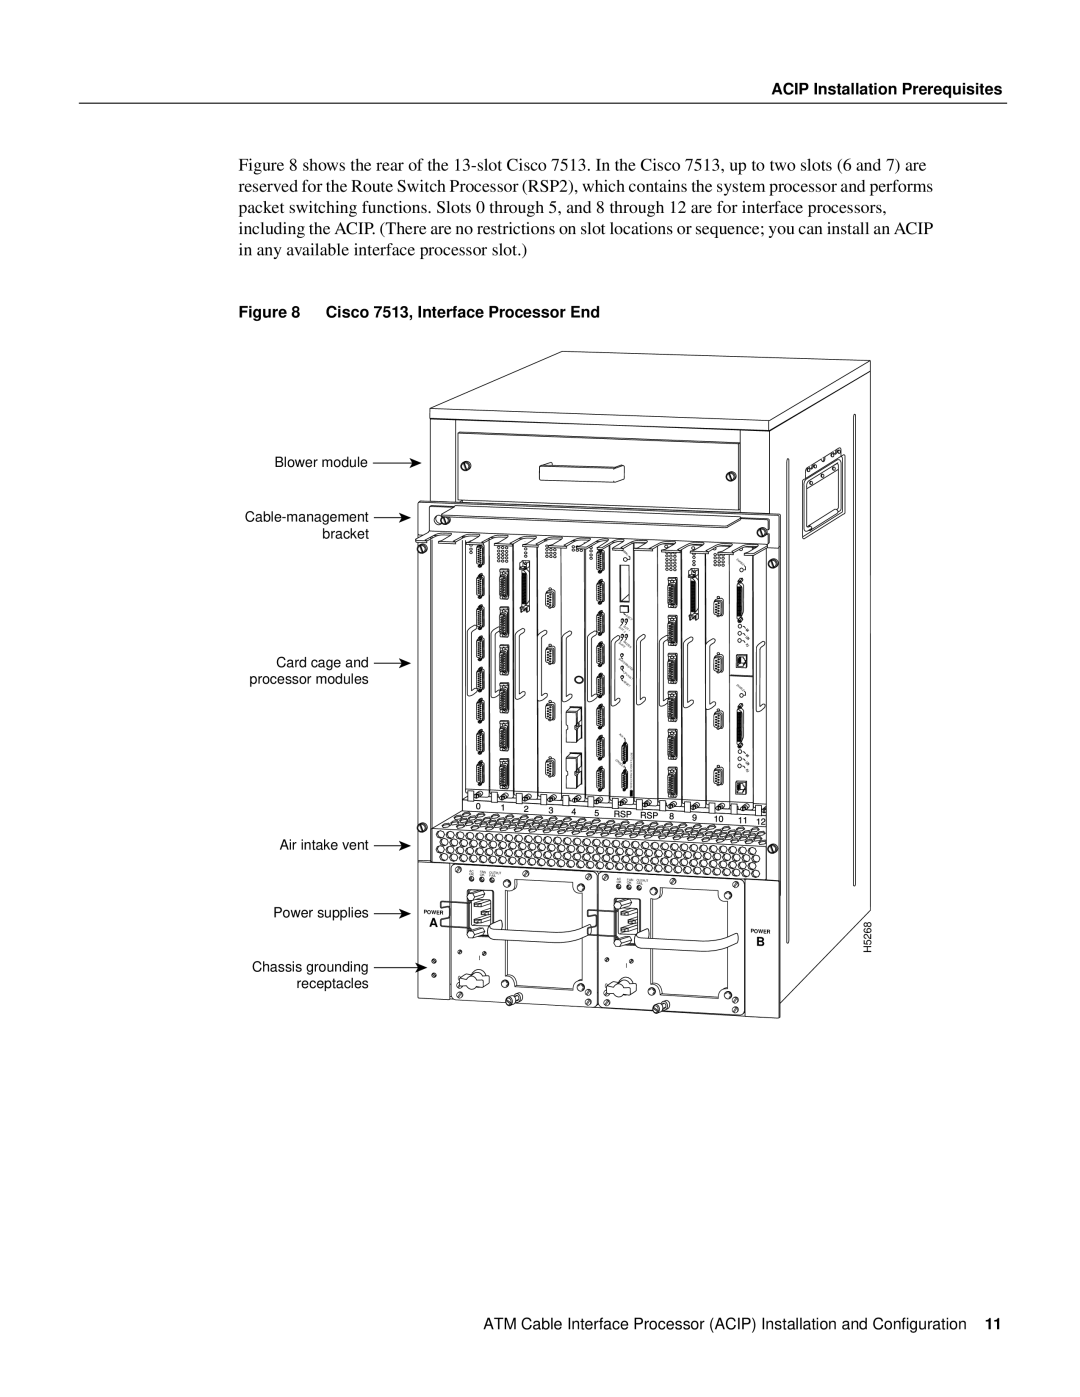 Cisco Systems ACIP-SM(=) manual Chassis grounding 